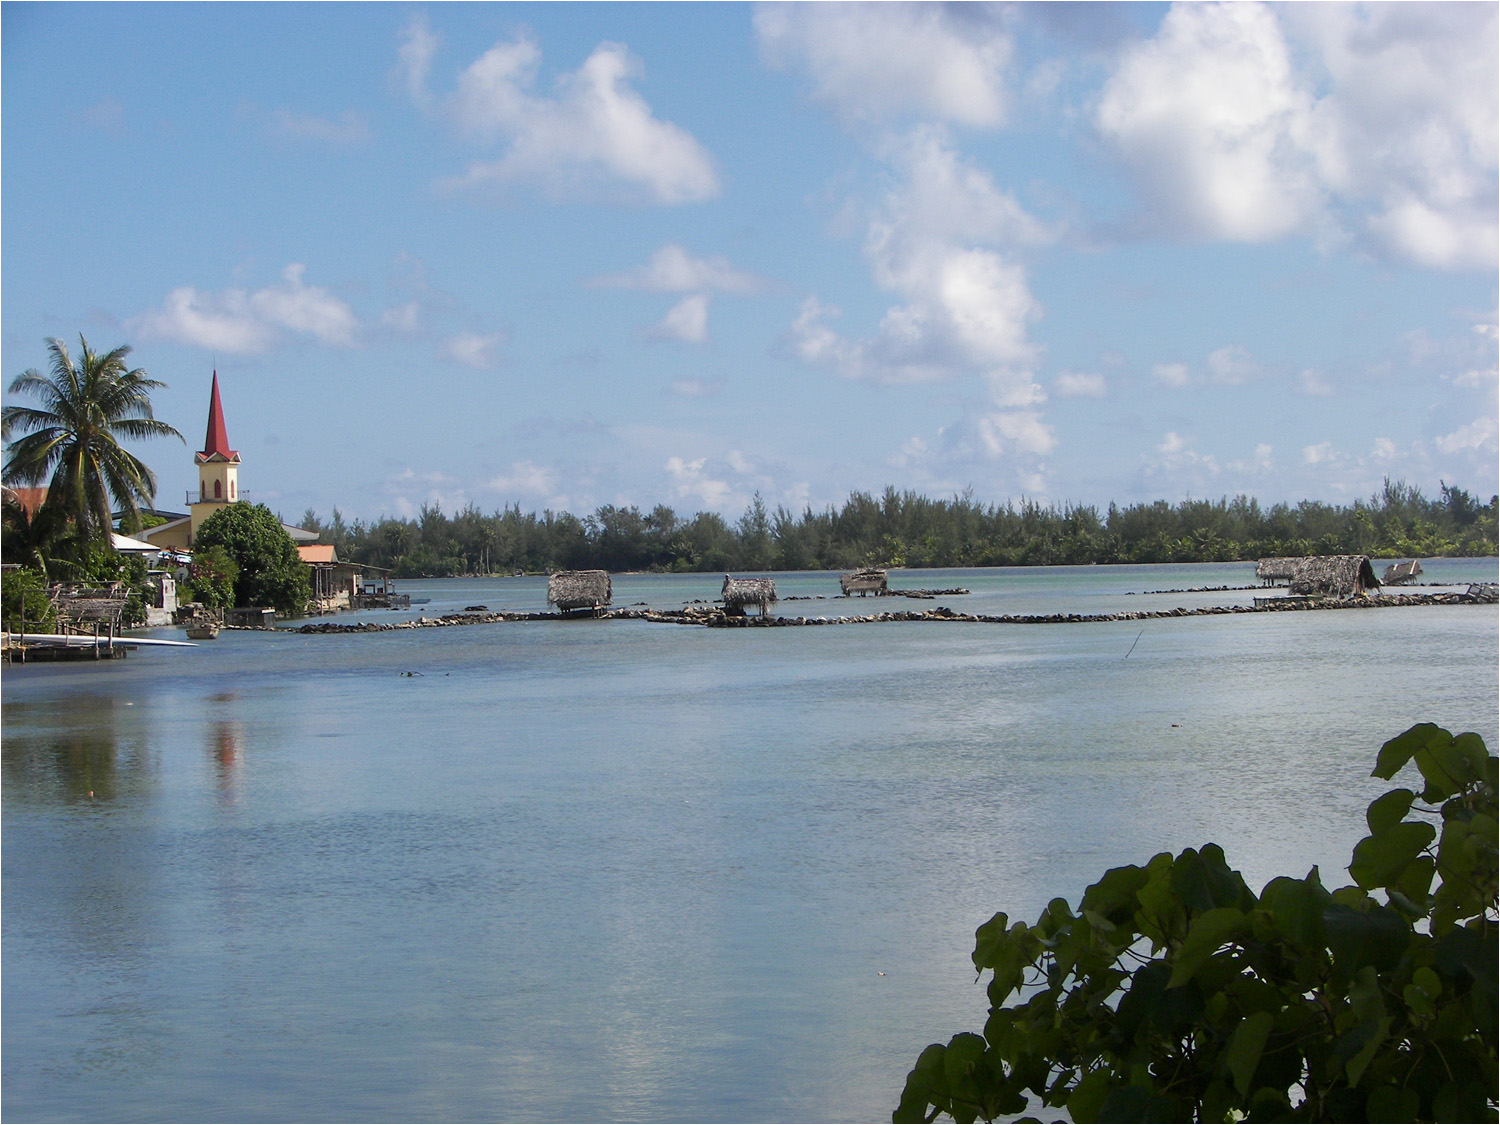 A series of fish traps set up near the bridge which connects the two islands of Huahine.  As much as 400 fish are caught in a single day in these traps.